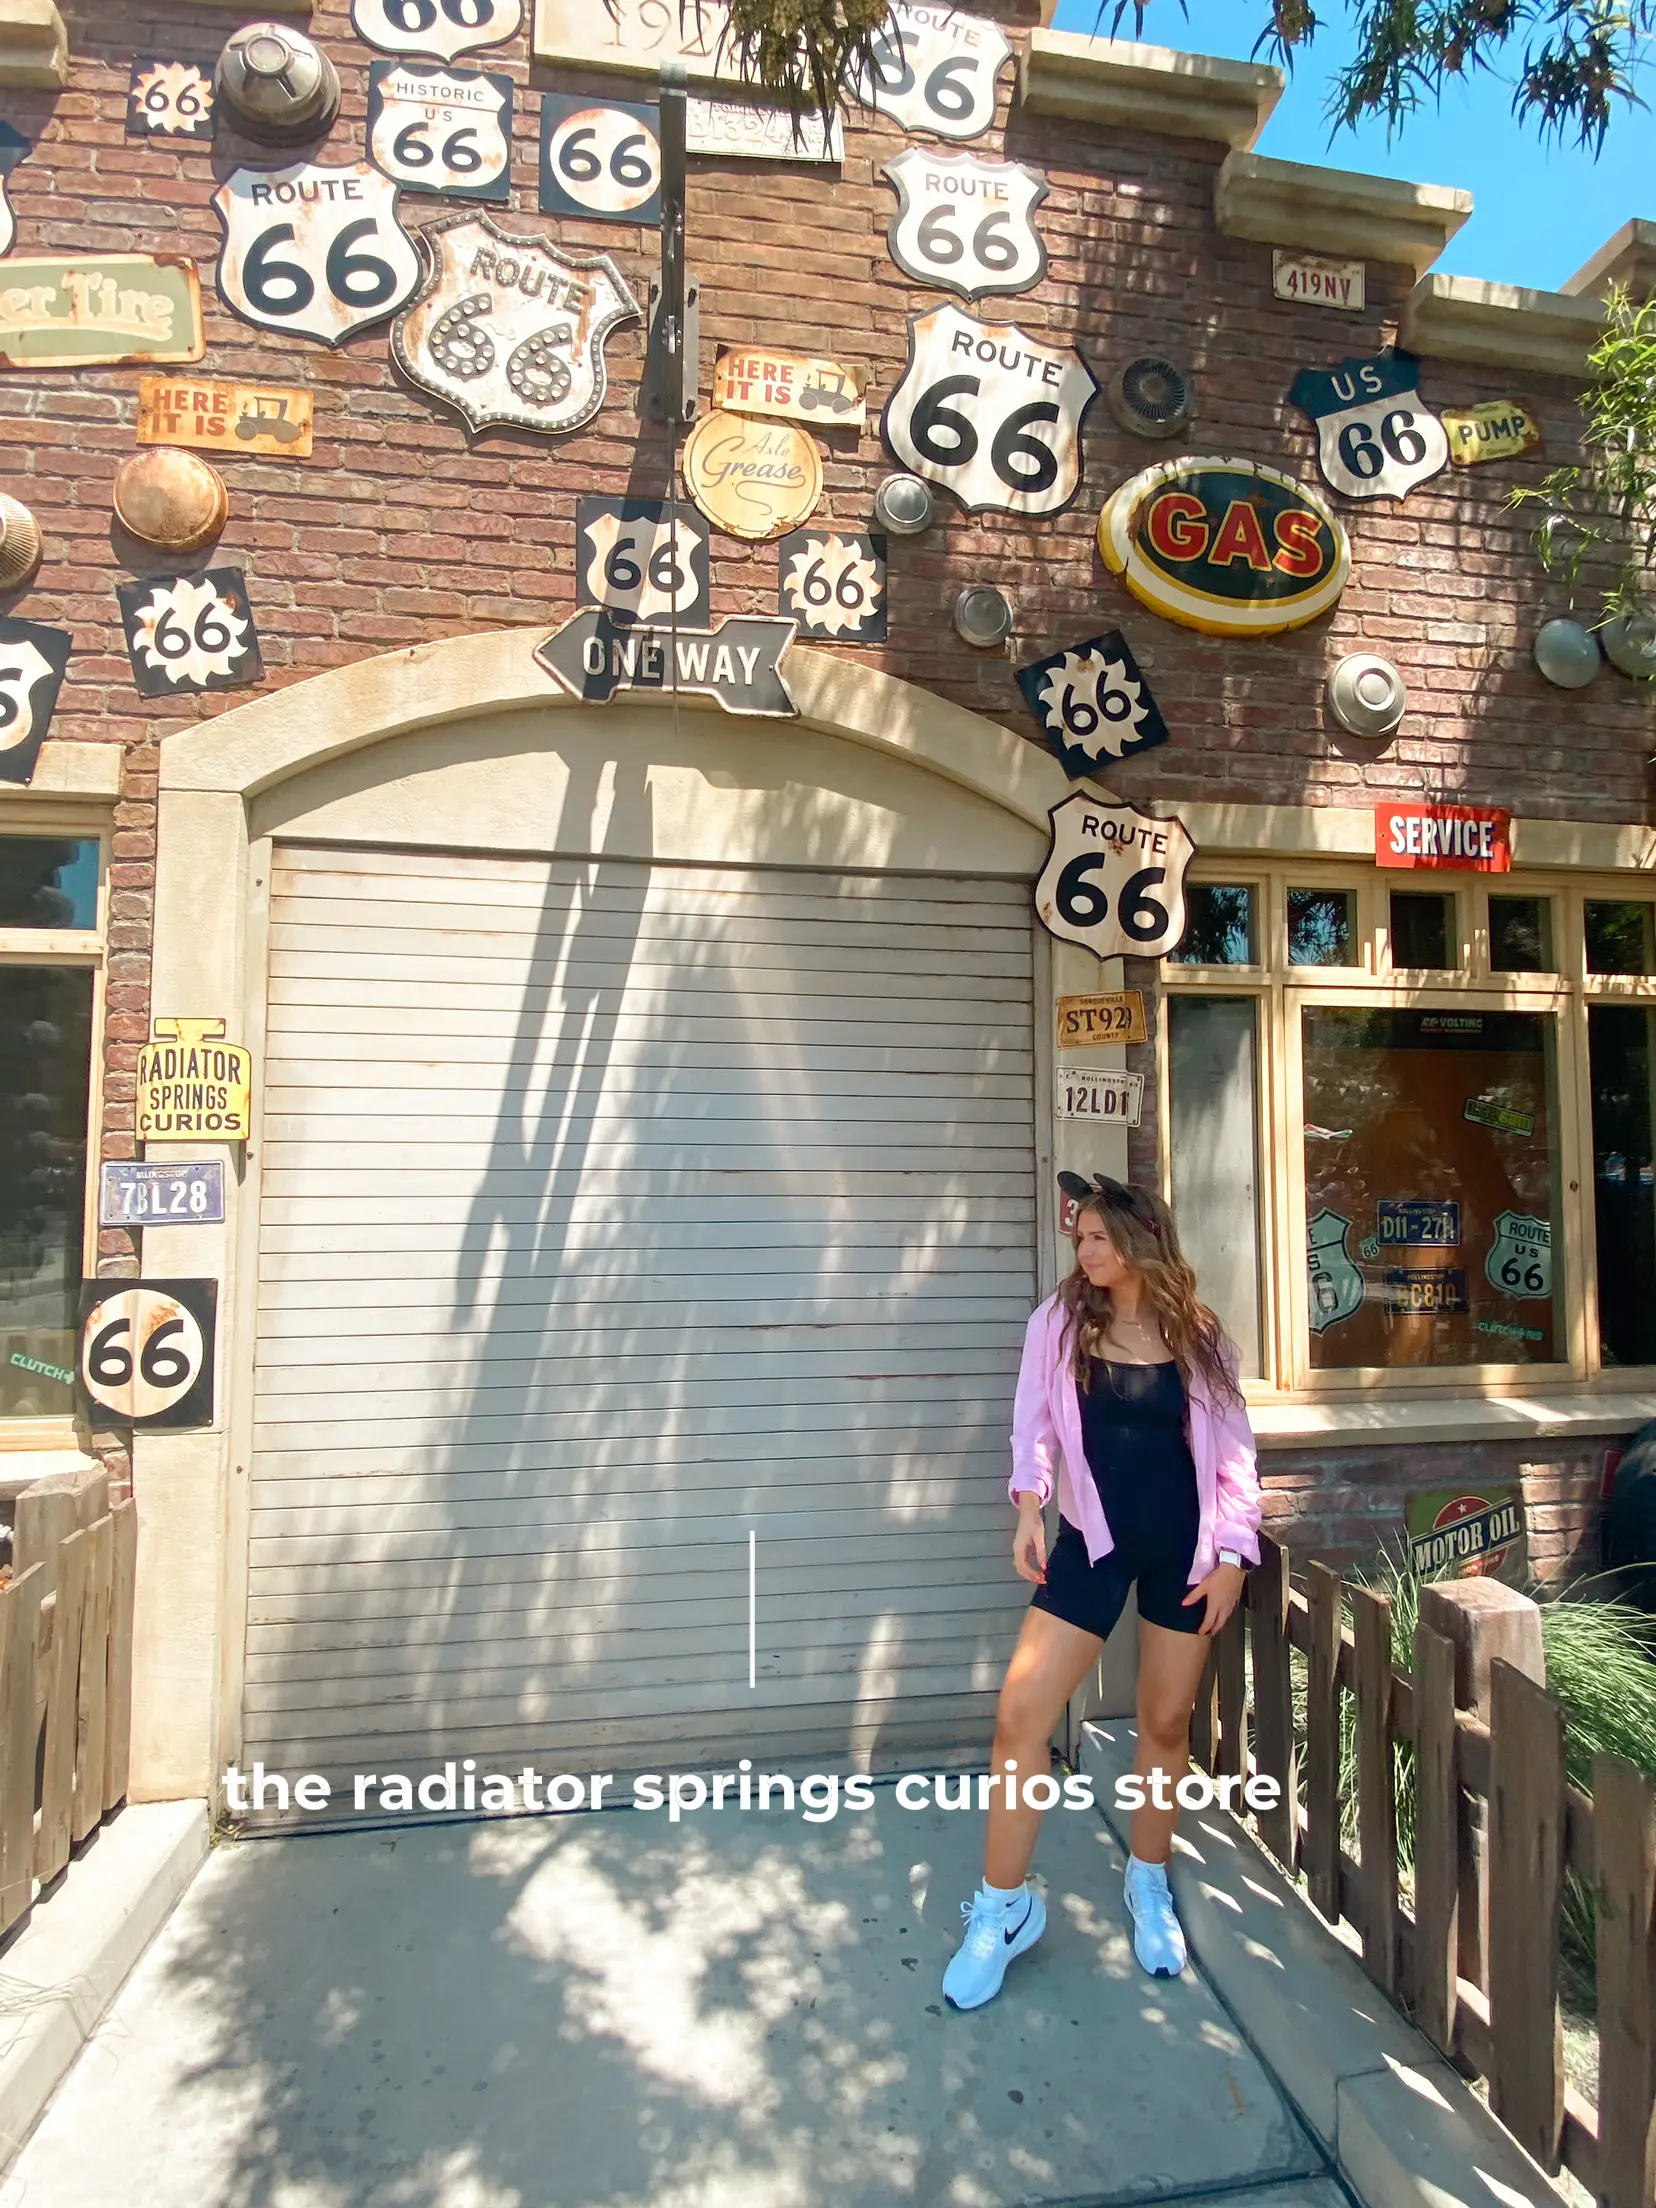  A woman is standing in front of a store with a sign that says " Route 66". The store has a variety of signs on the door, including a " Route 66" sign.